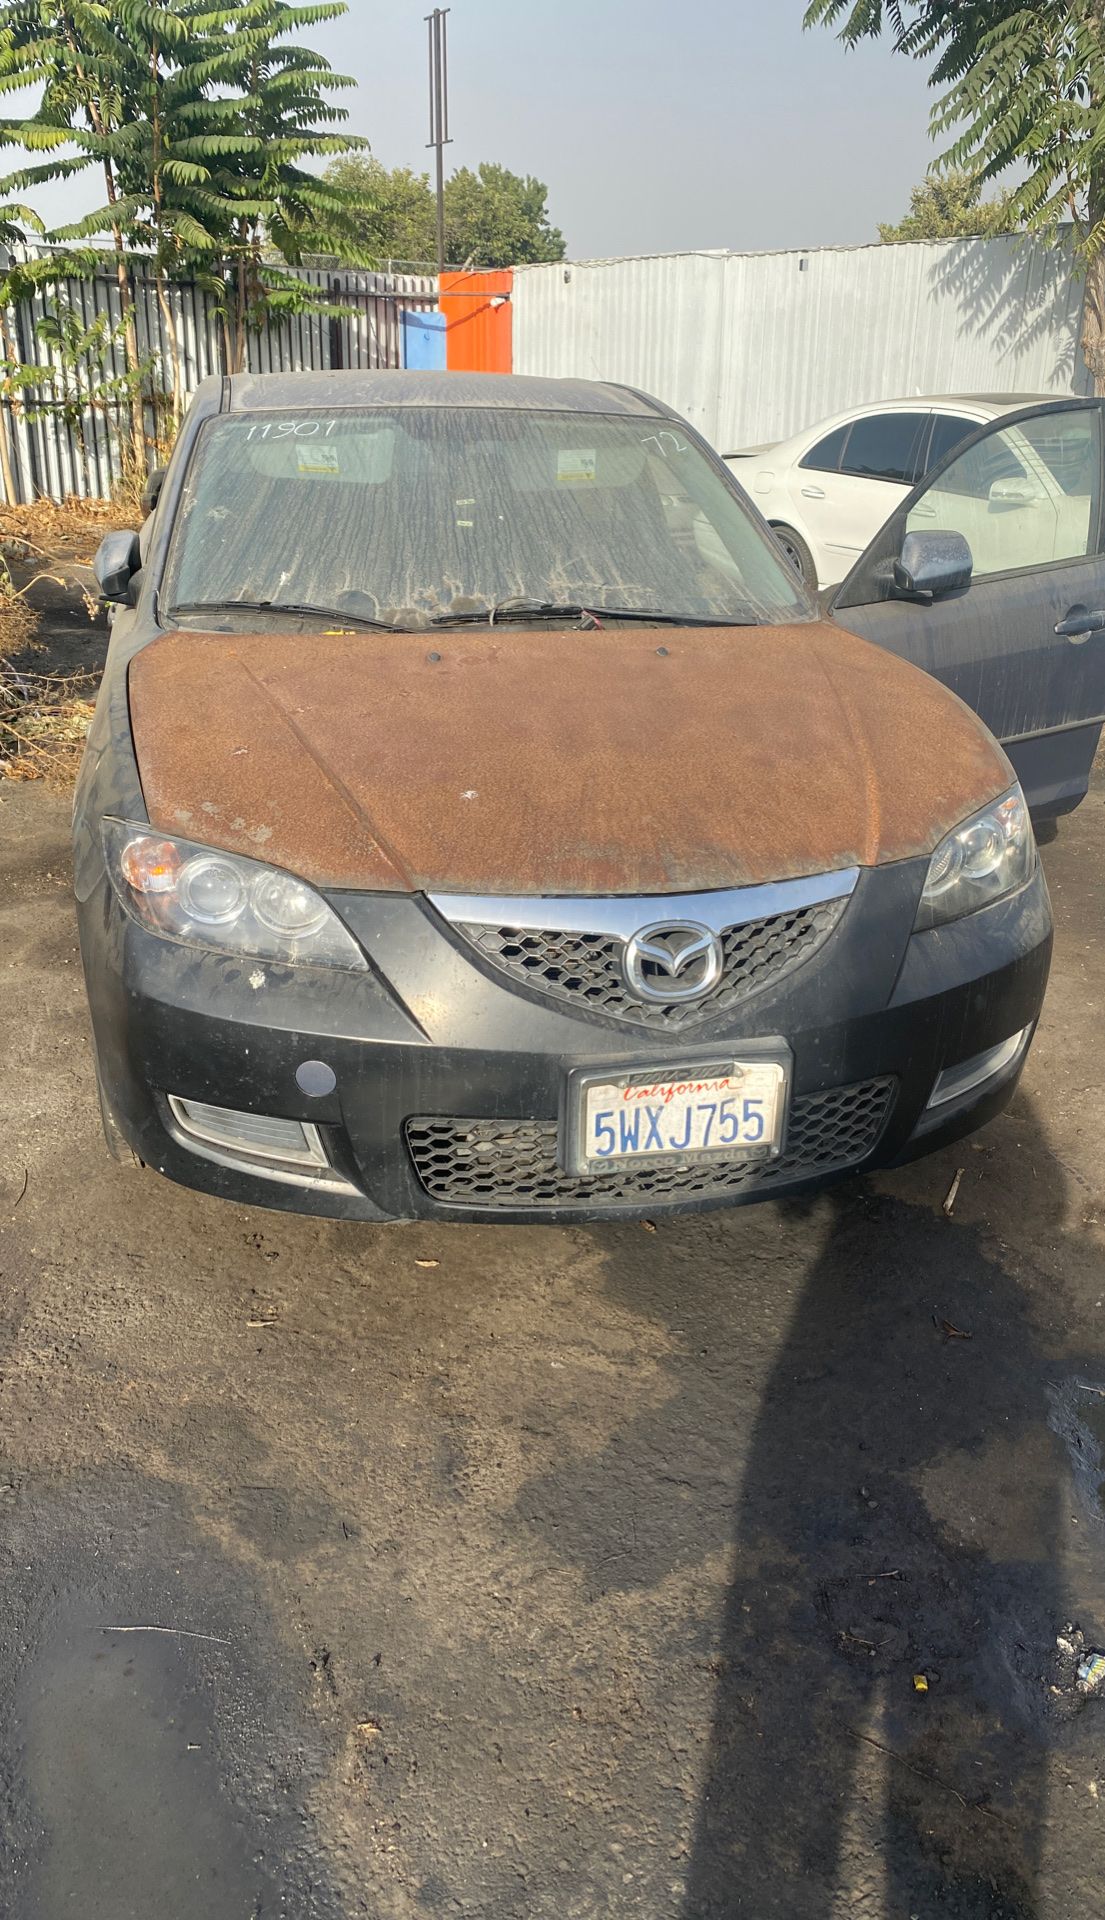 2007 Mazda 3 for parts no motor or catalytic converter